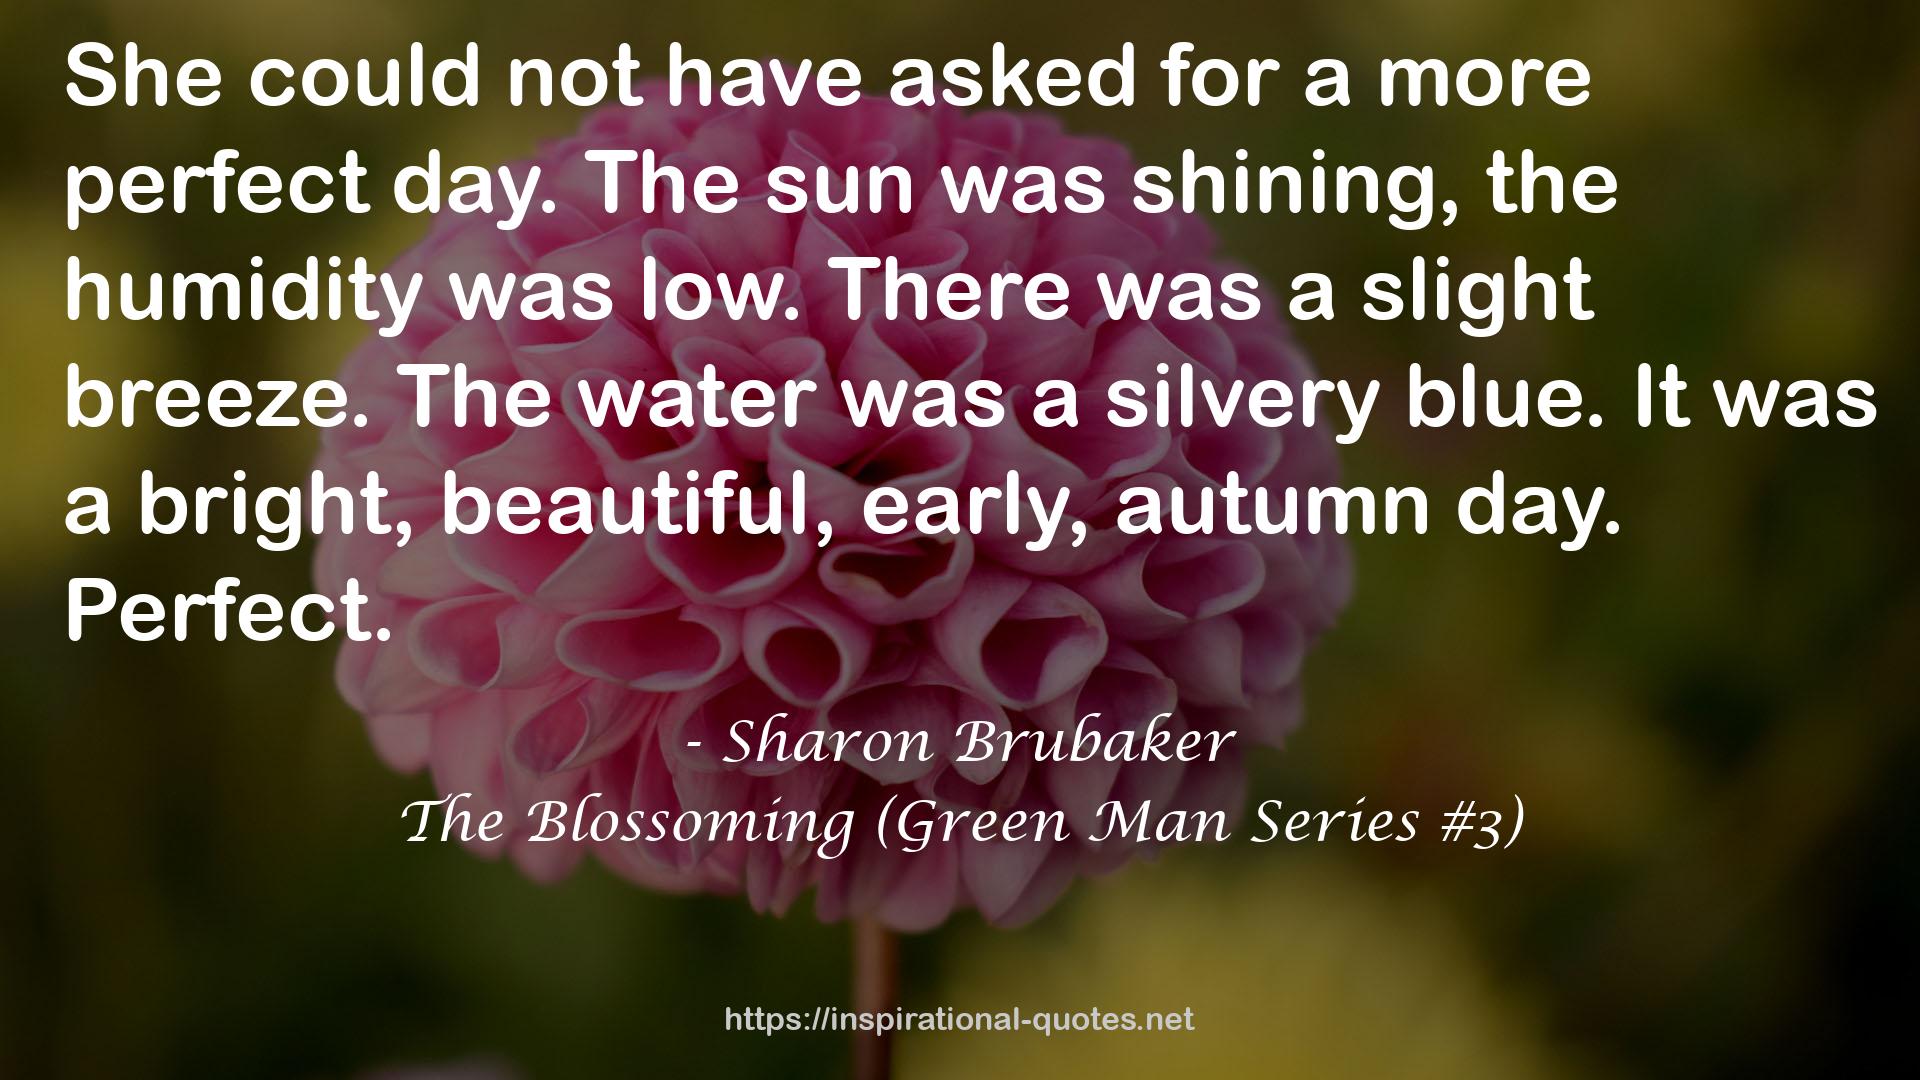 The Blossoming (Green Man Series #3) QUOTES